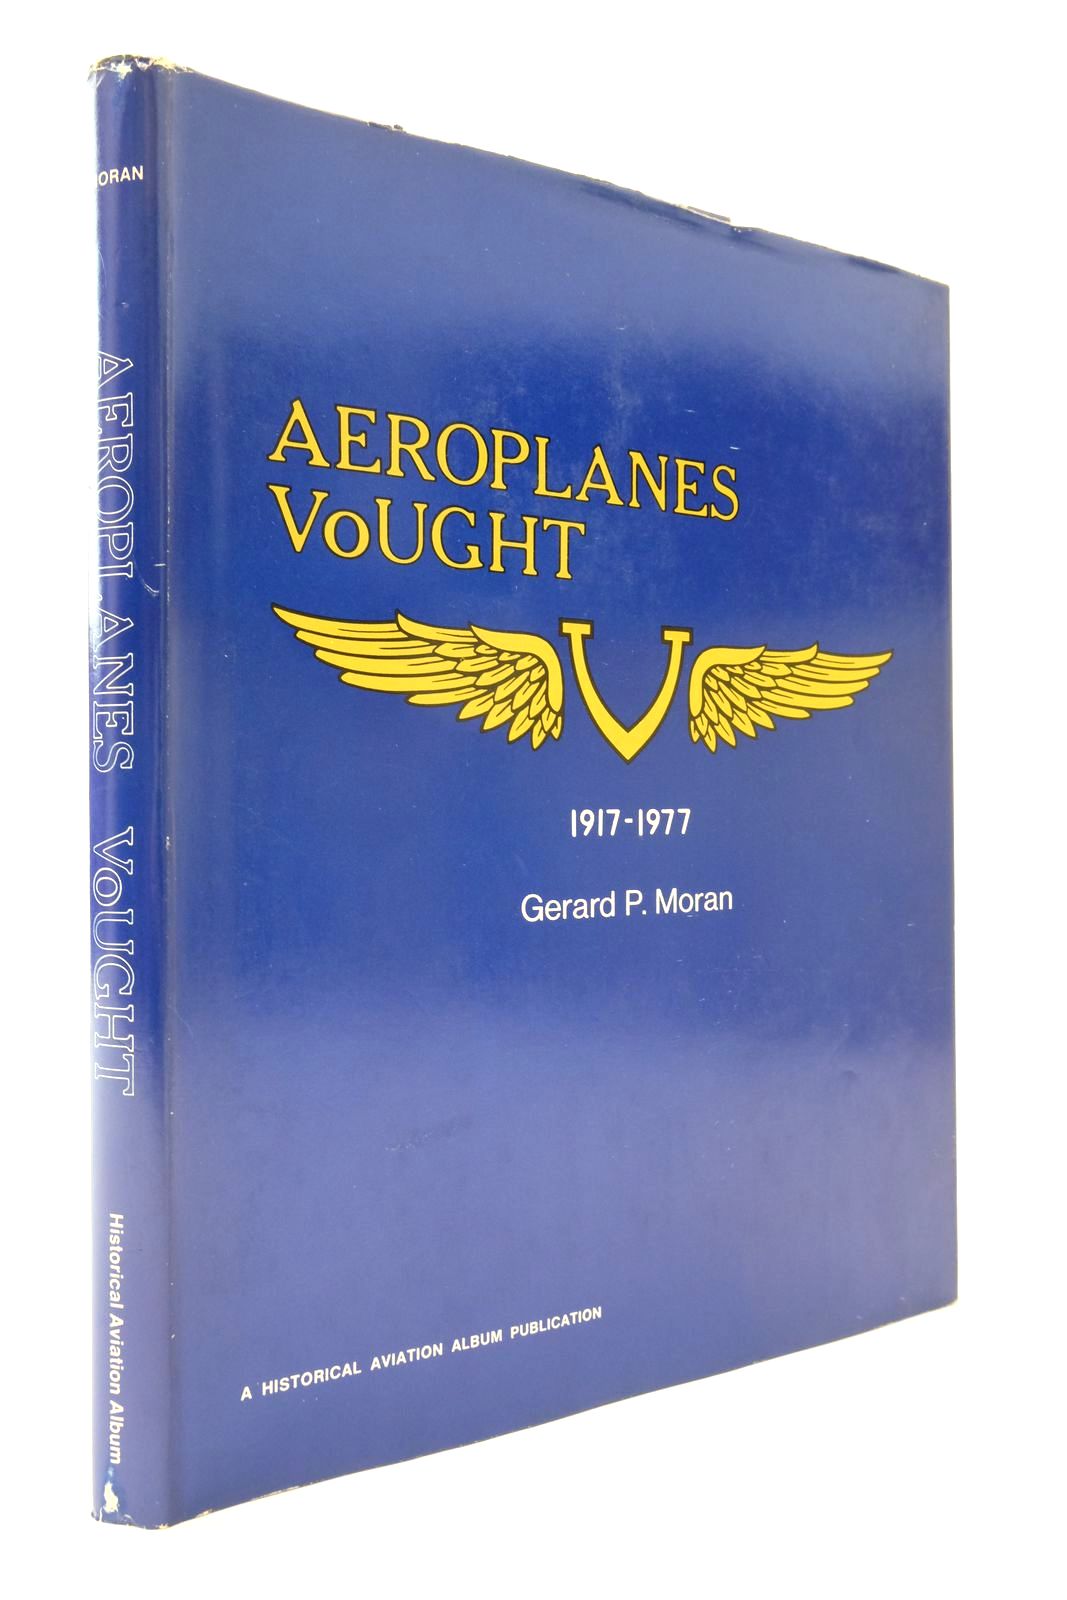 Photo of AEROPLANES VOUGHT 1917-1977 written by Moran, Gerard P. published by Historical Aviation Album (STOCK CODE: 2138466)  for sale by Stella & Rose's Books